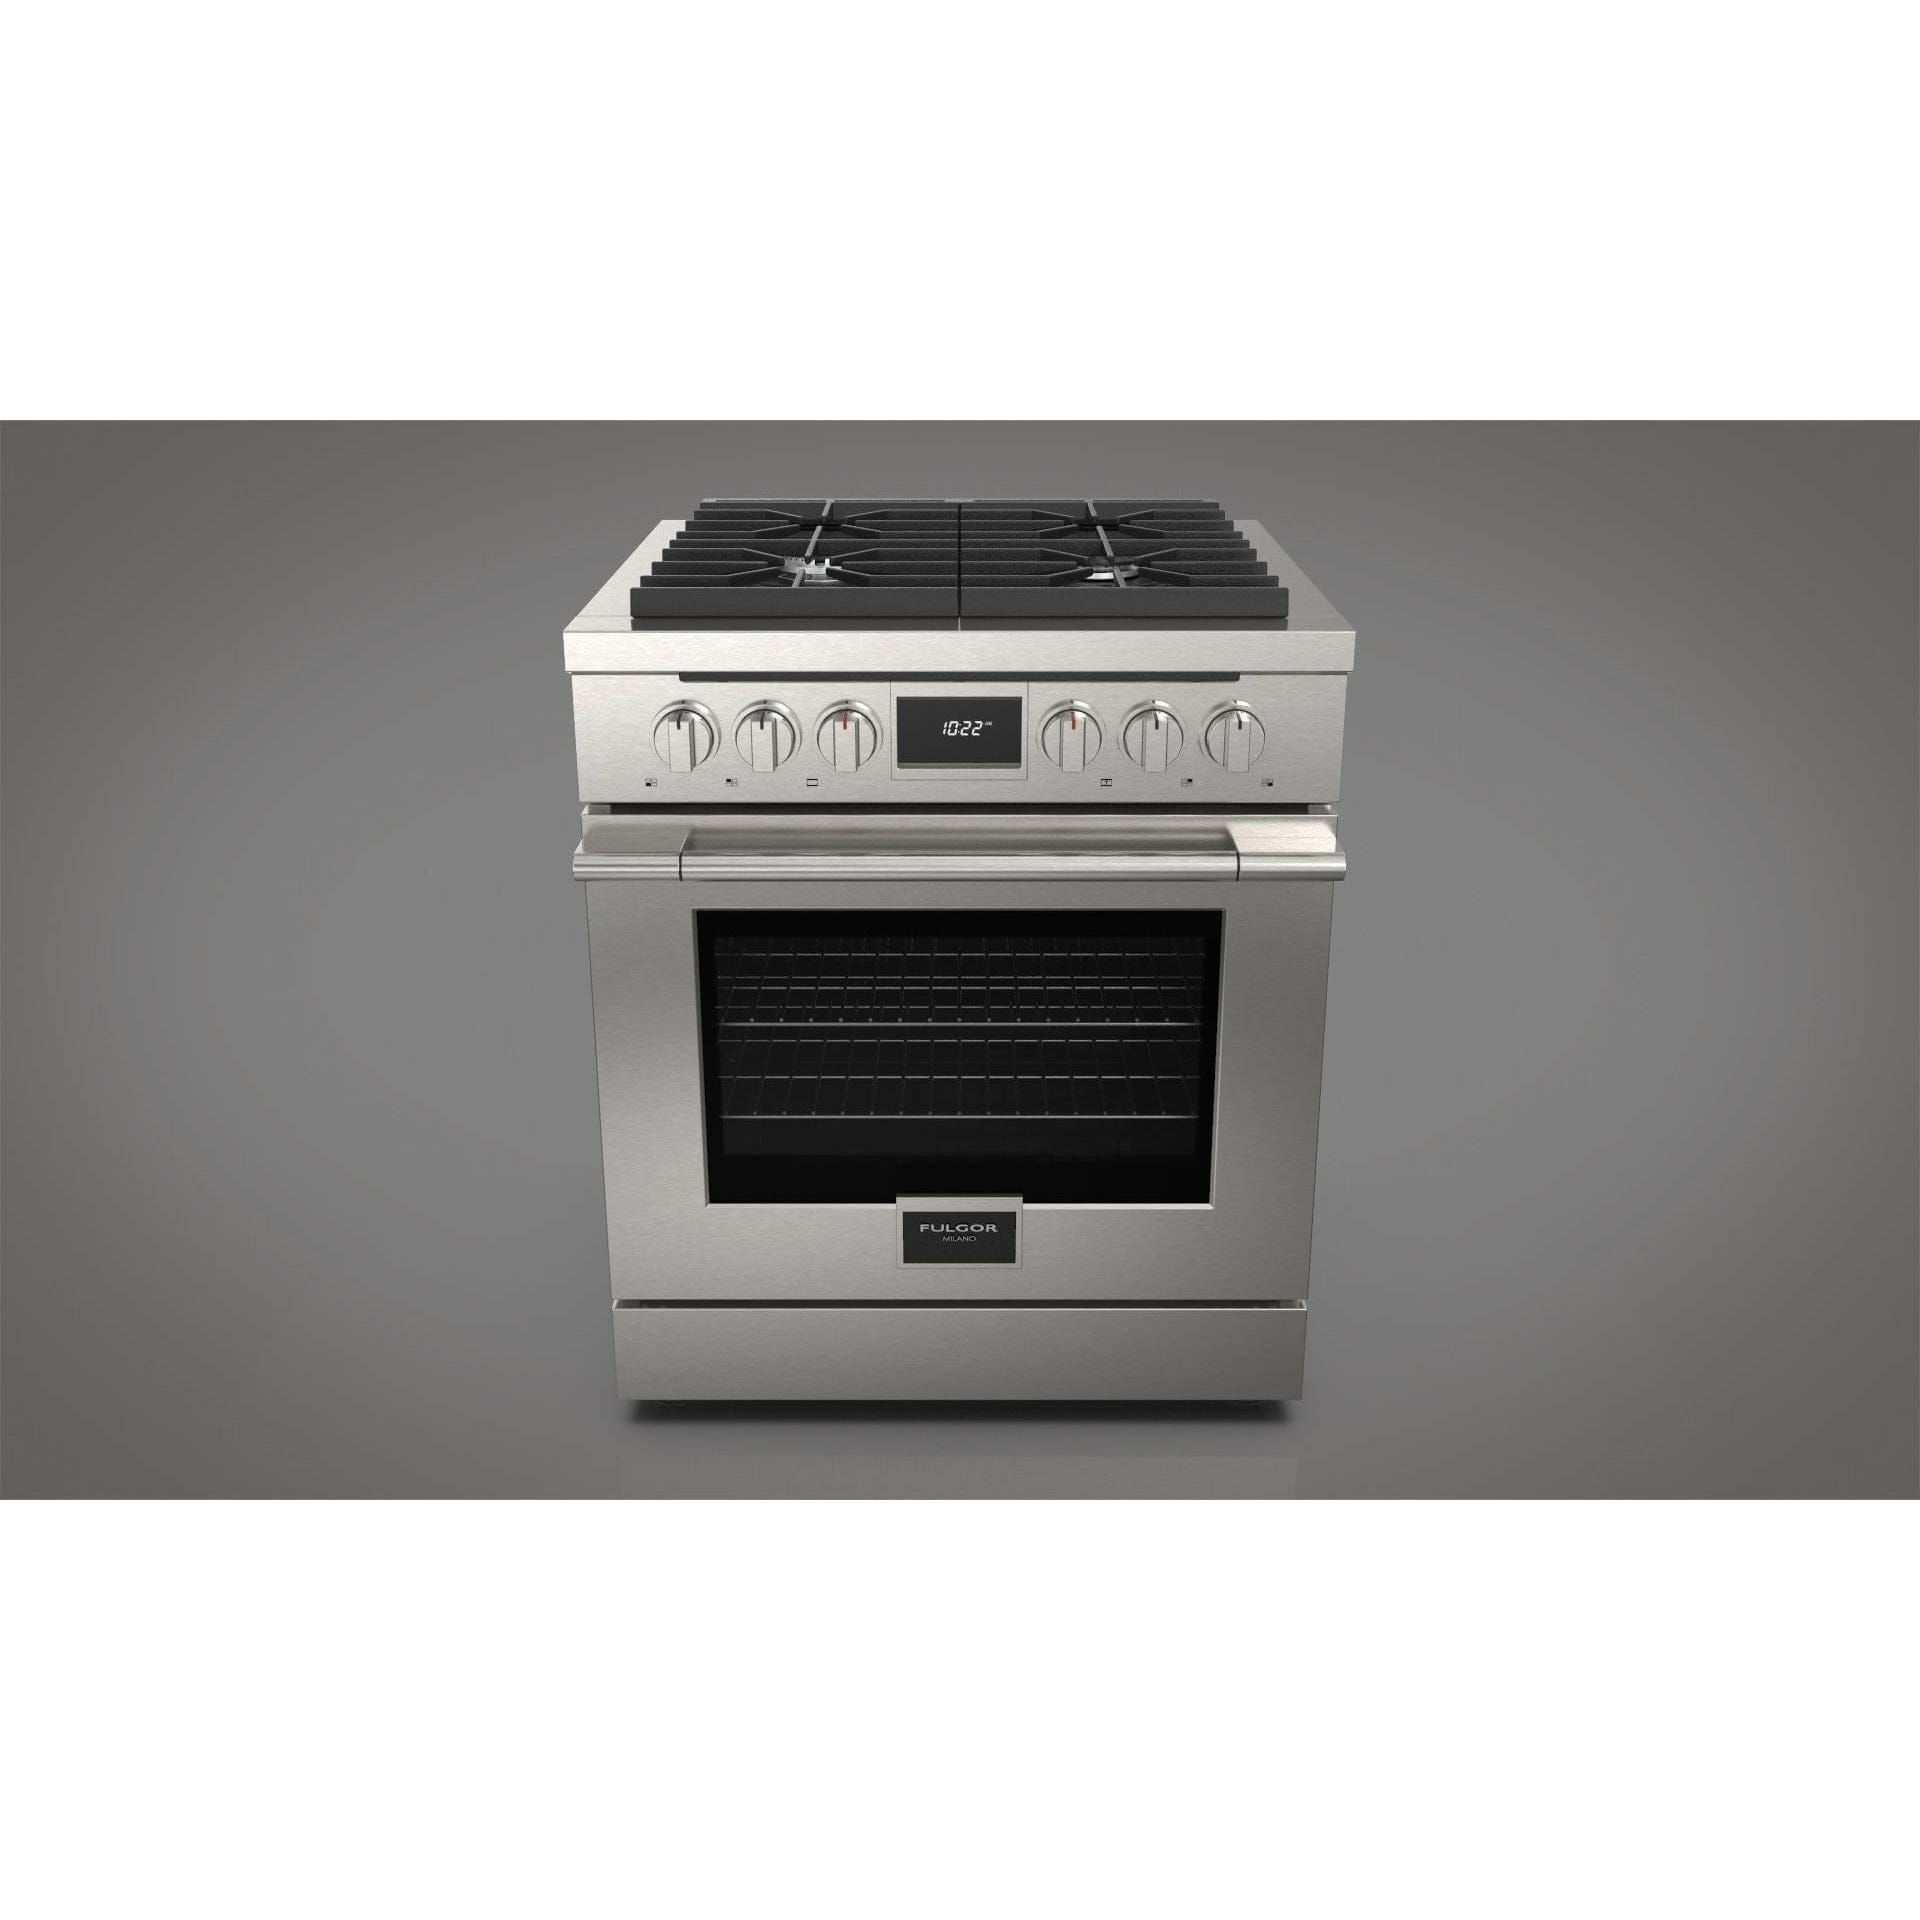 Fulgor Milano 30" Pro-Style Dual Fuel Range with 4 Sealed Burners,  4.4 Cu. Ft. Capacity w/  Stainless Steel - F4PDF304S1 Ranges F4PDF304S1 Luxury Appliances Direct